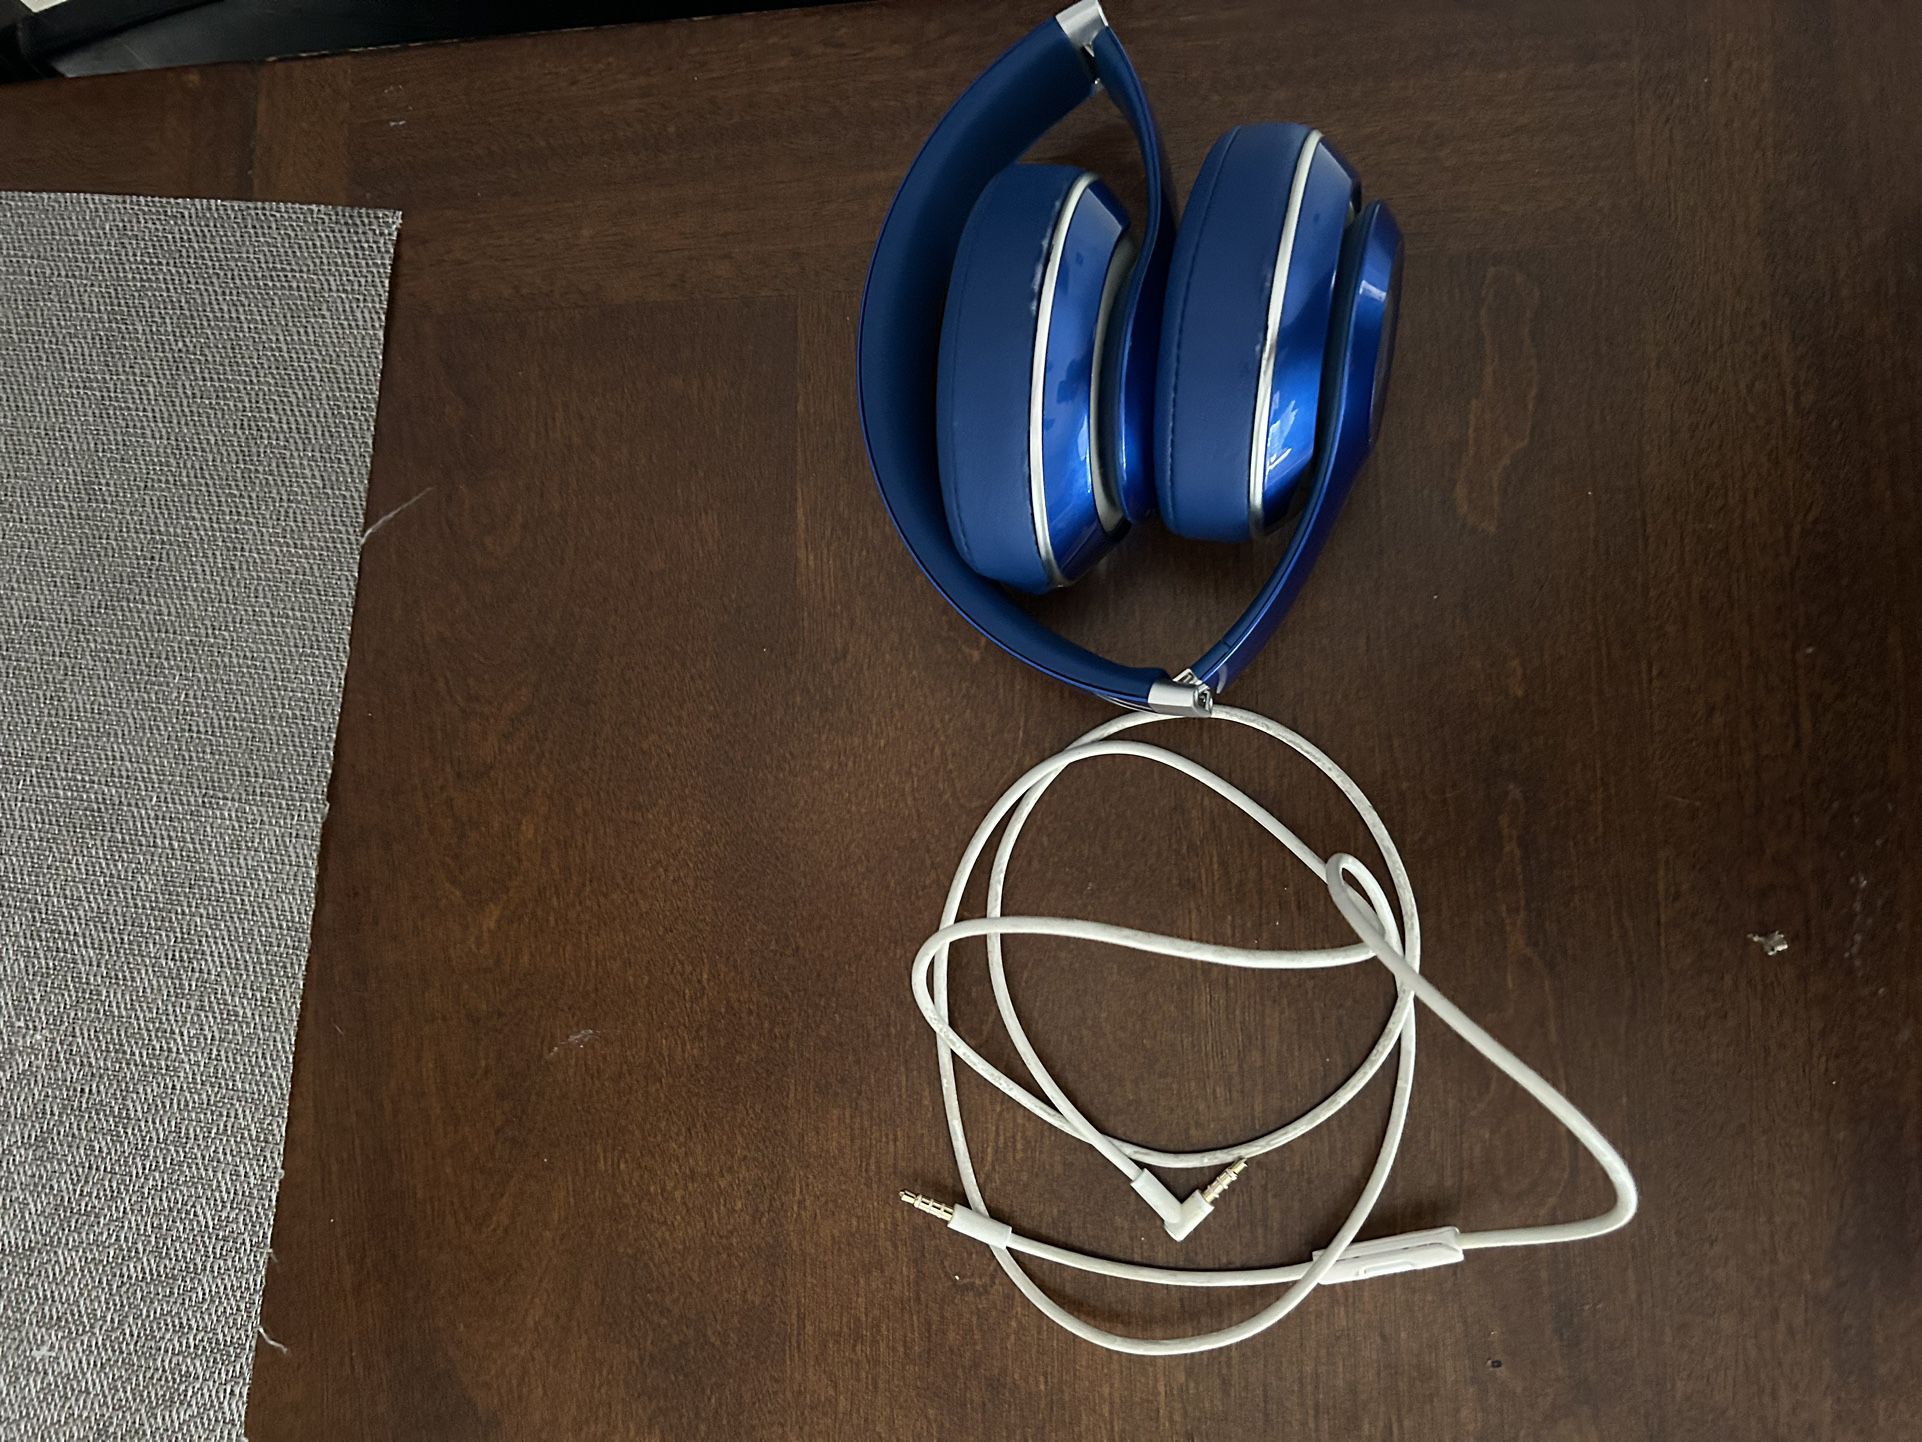 Beats Studio Wired (Non-BlueTooth, Must Use Cord